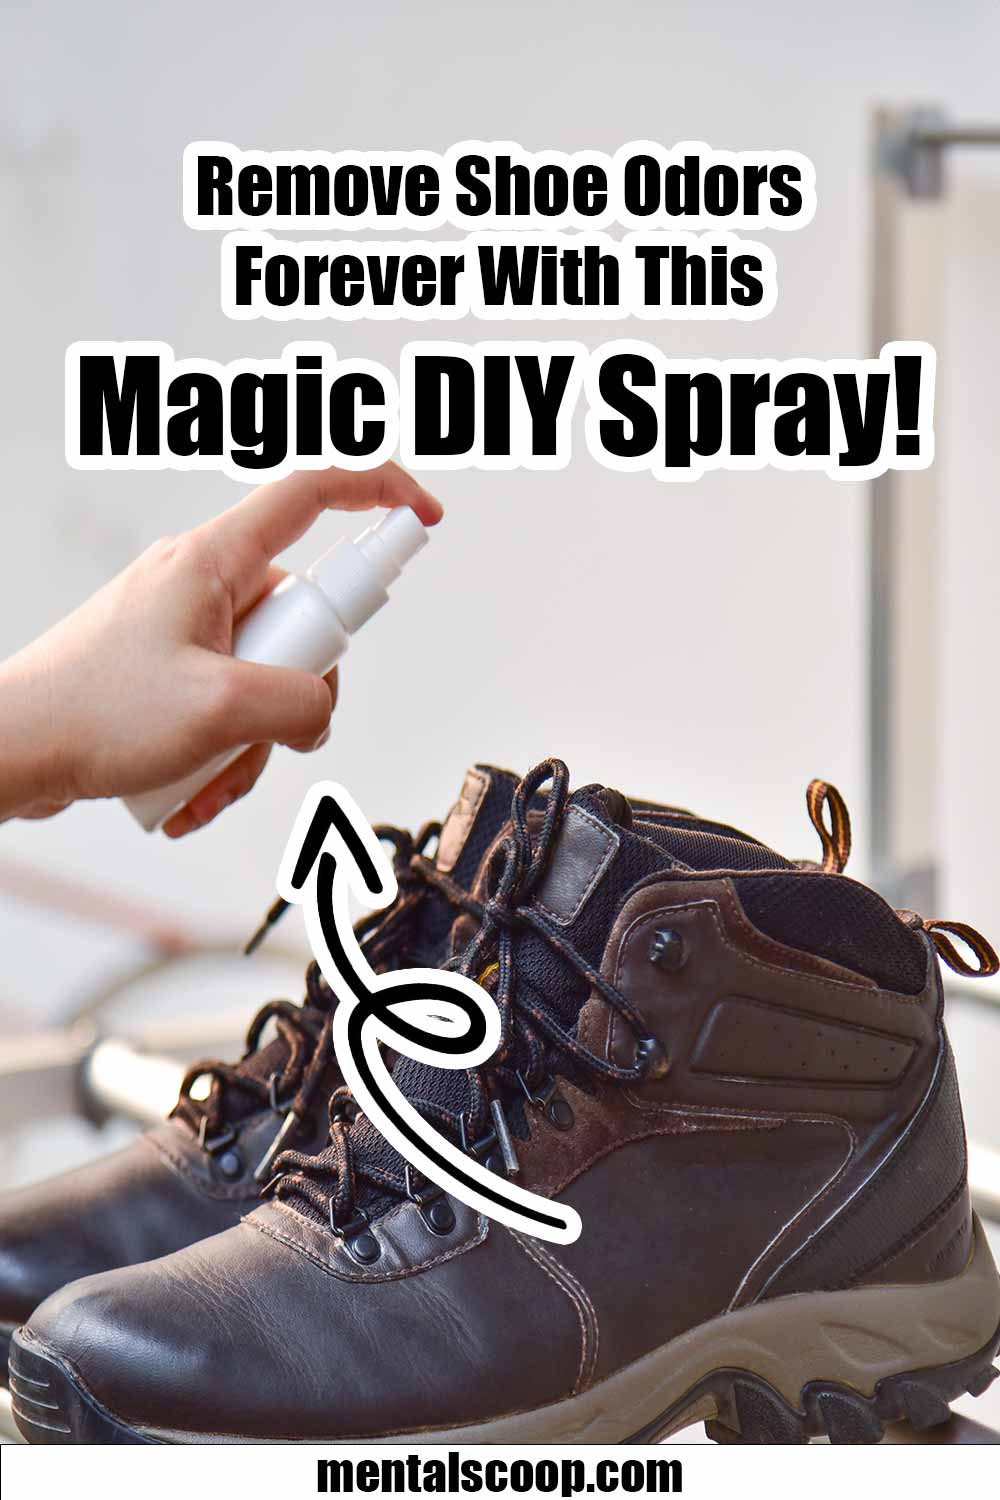 How To Remove Shoe Odors Forever With This DIY Spray! - Mental Scoop